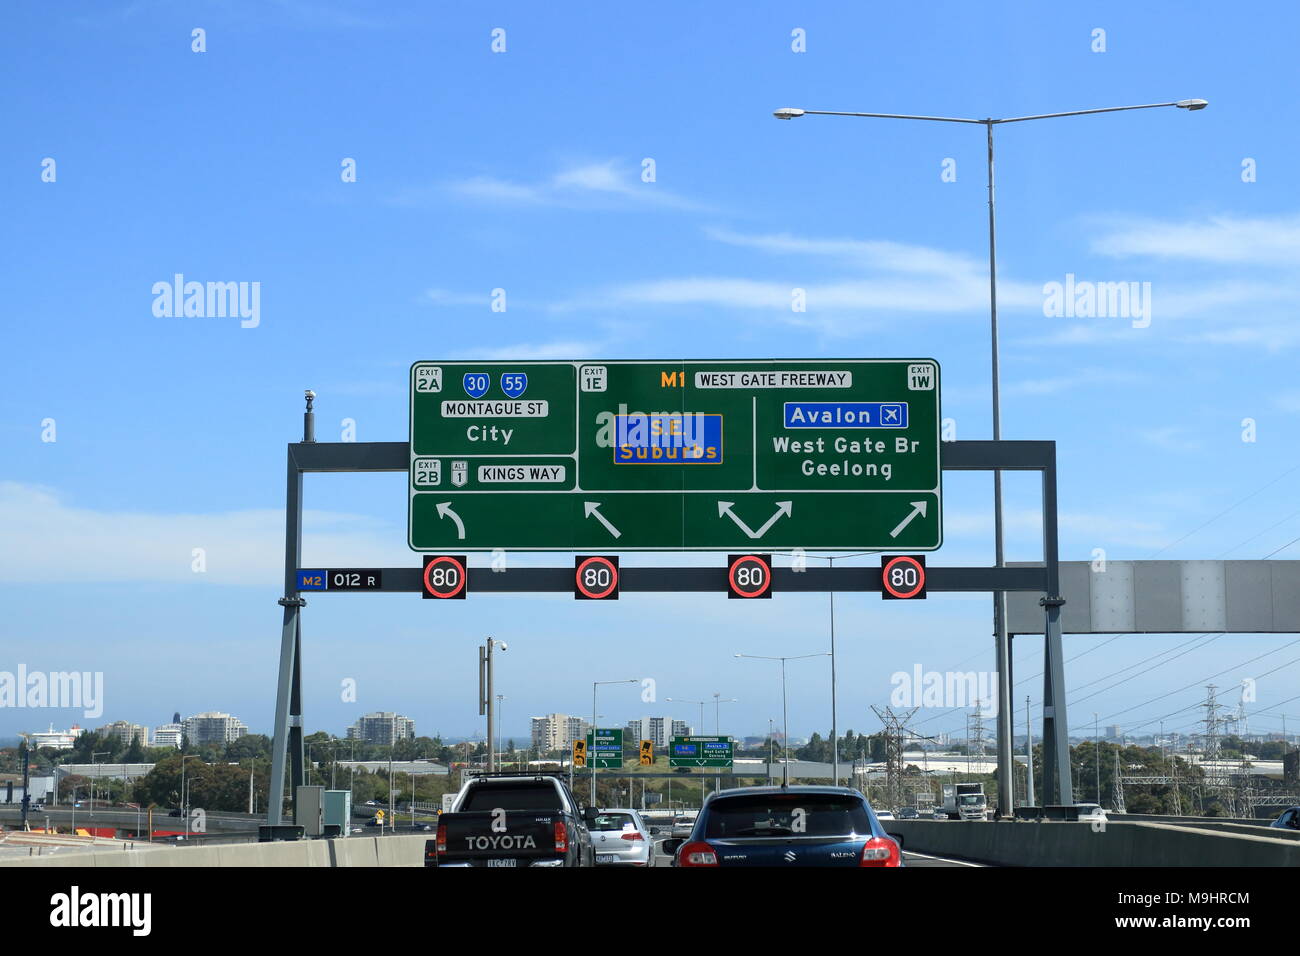 Melbourne road sign to West Gate Freeway, South Eastern suburbs, Avalon airport, West Gate Bridge and Geelong Stock Photo